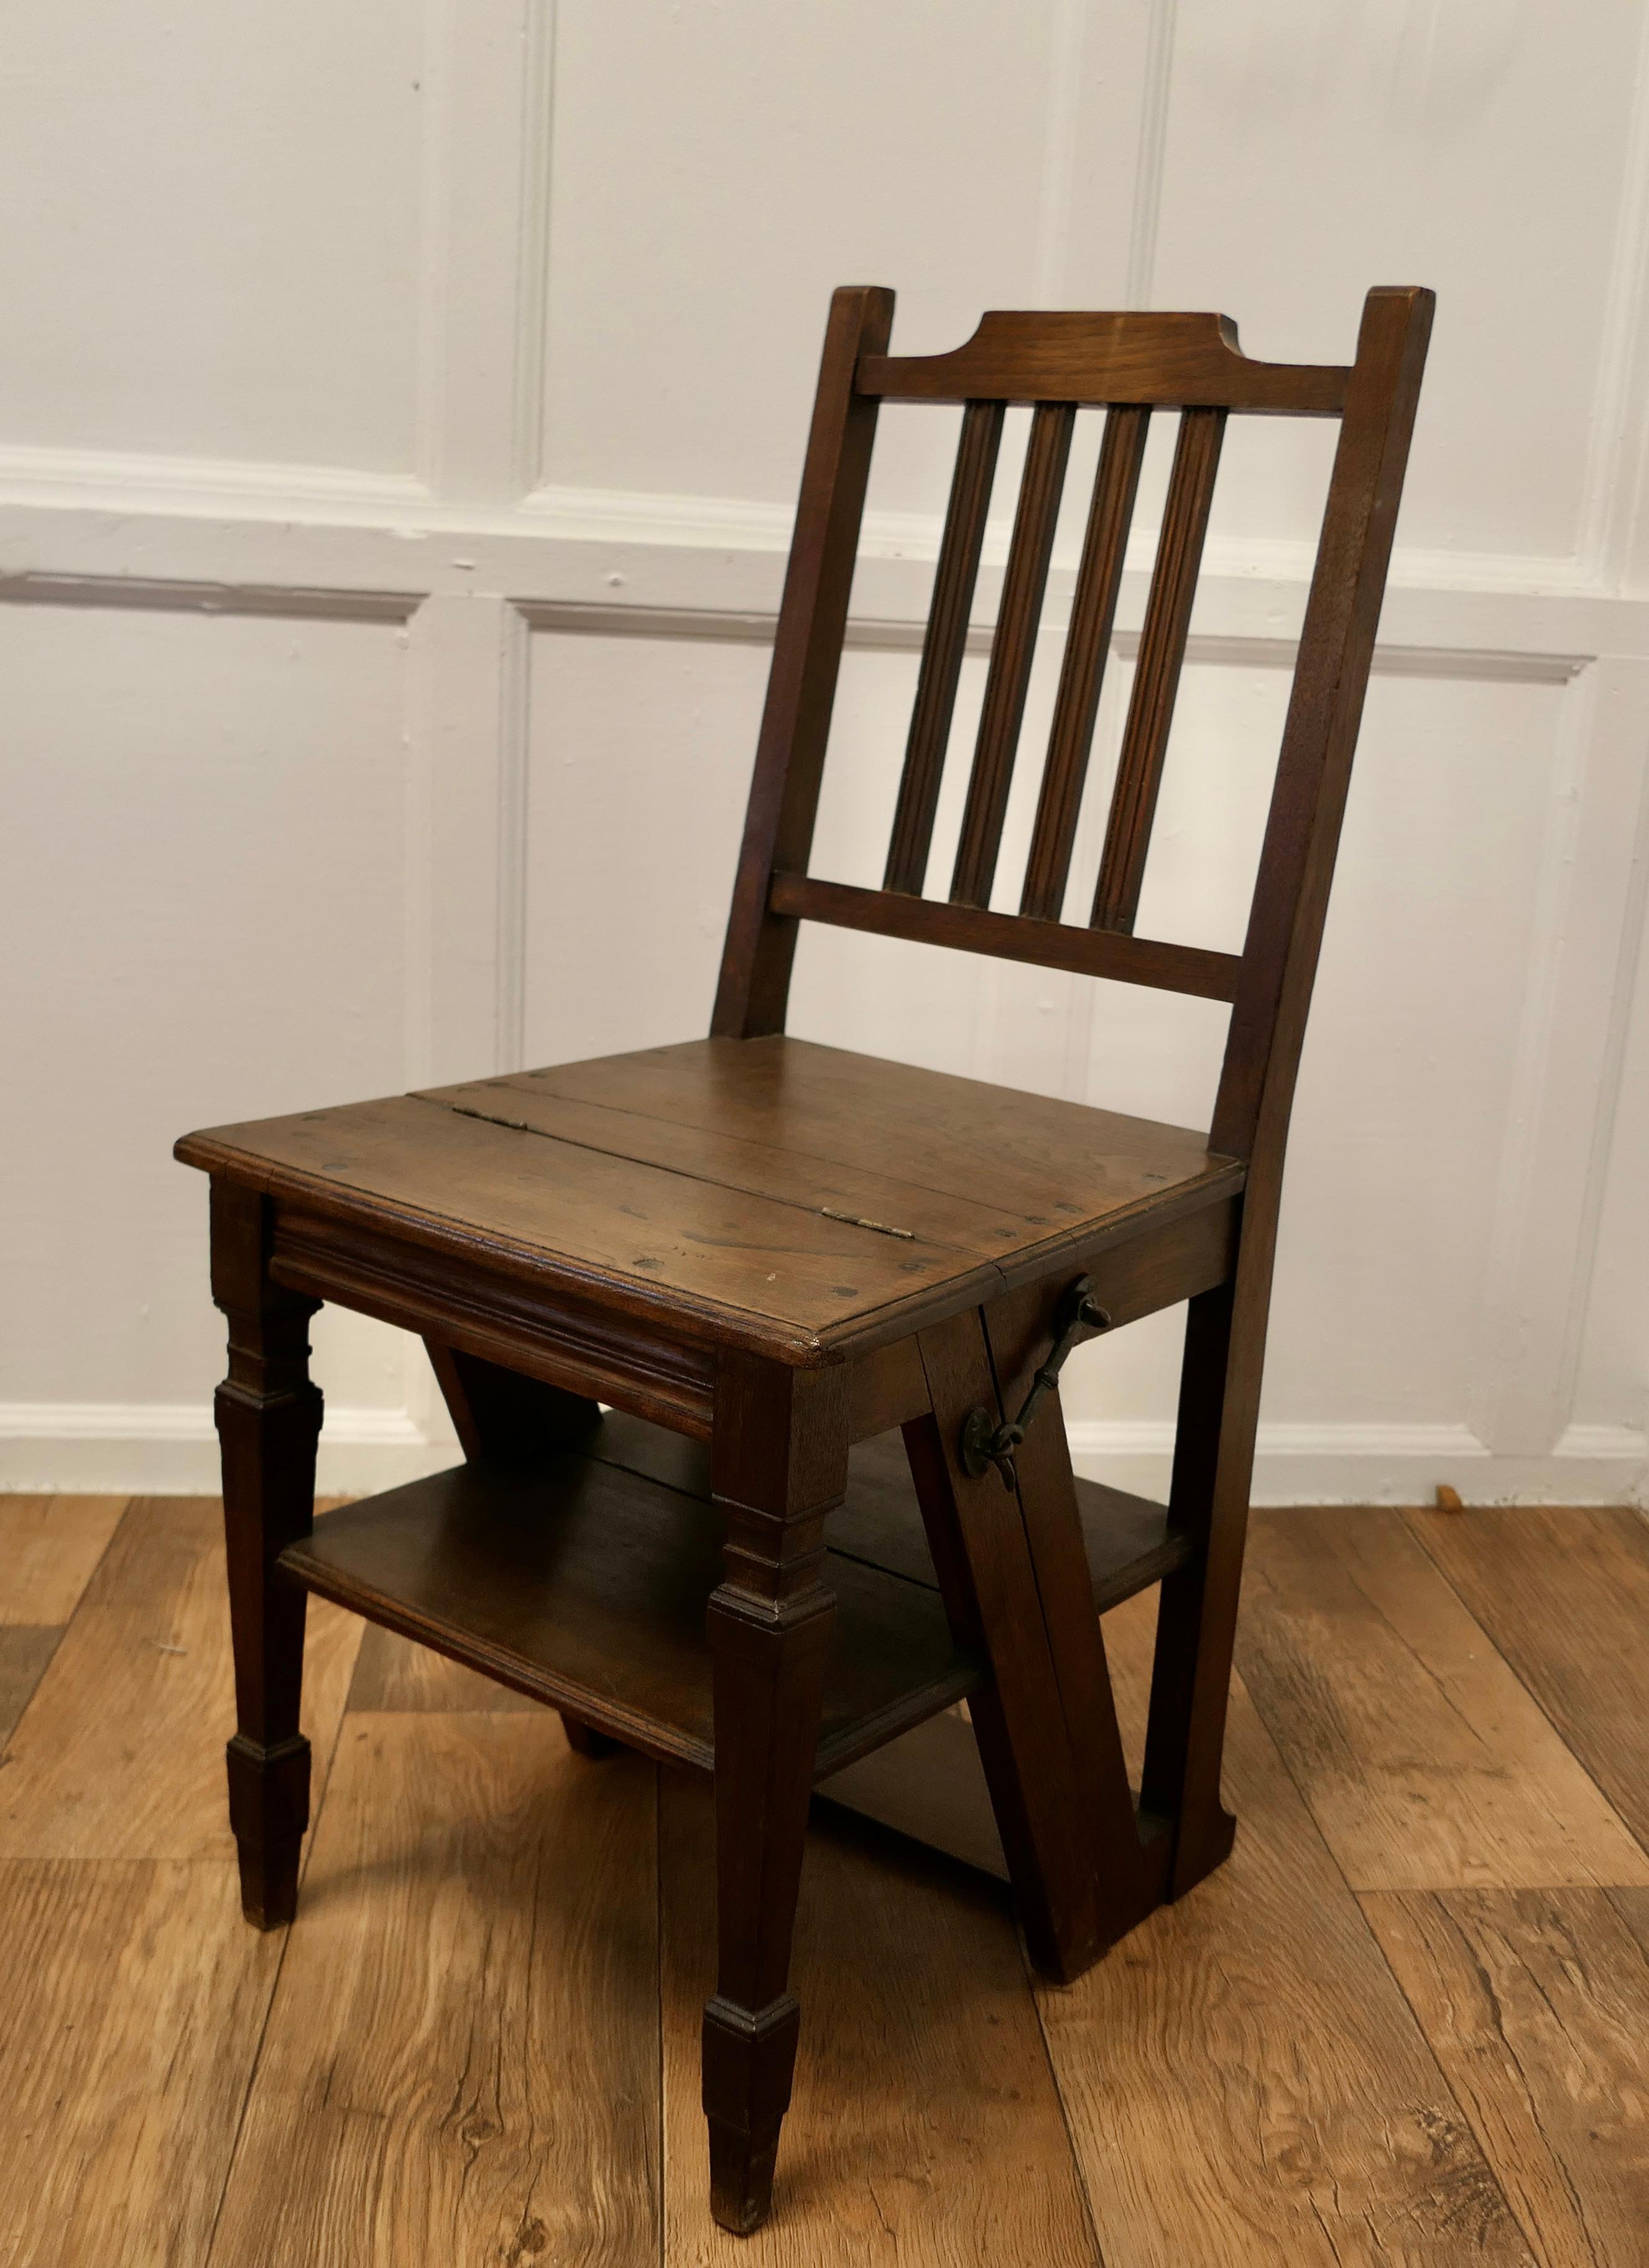 Edwardian Metamorphic Library Chair or Library Steps 

A very useful piece, this handy little chair can be flipped over and turned into a small 4 step ladder, originally this type of chair was used in a Library hence the name, but it would work